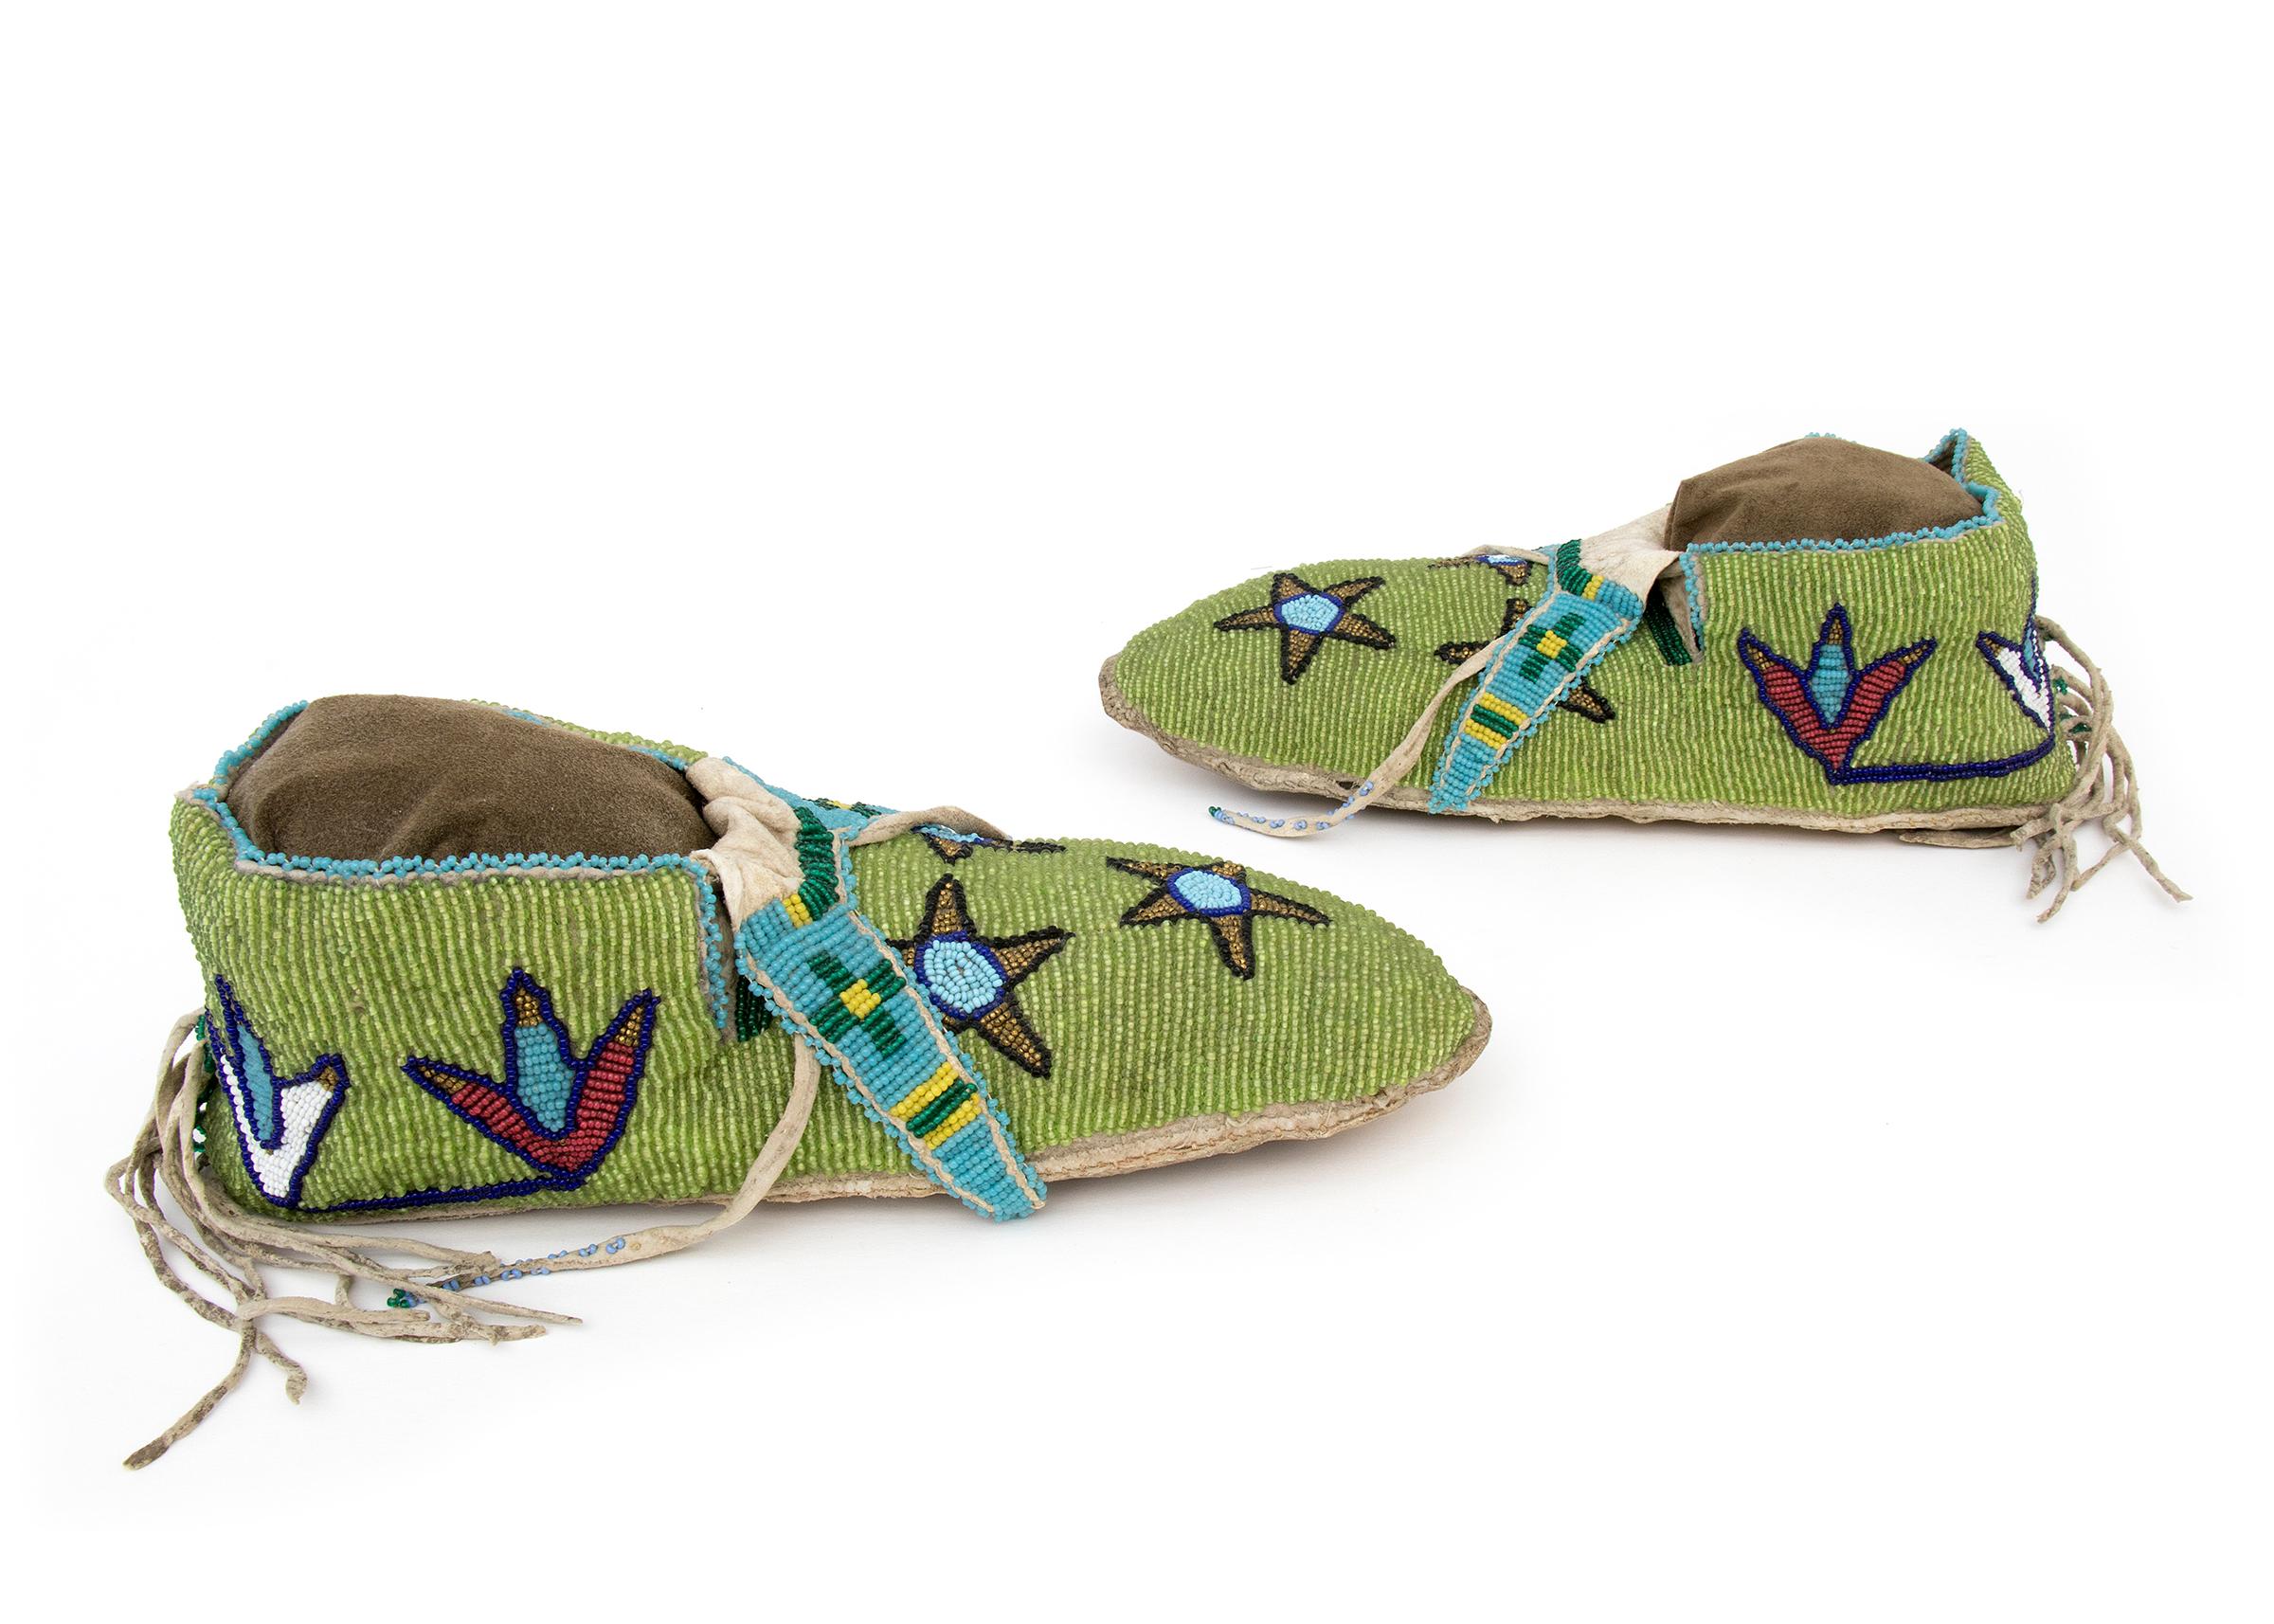 American Antique Beaded Moccasins, Cree, Plains Indian, circa 1890, Star & Cactus Flowers